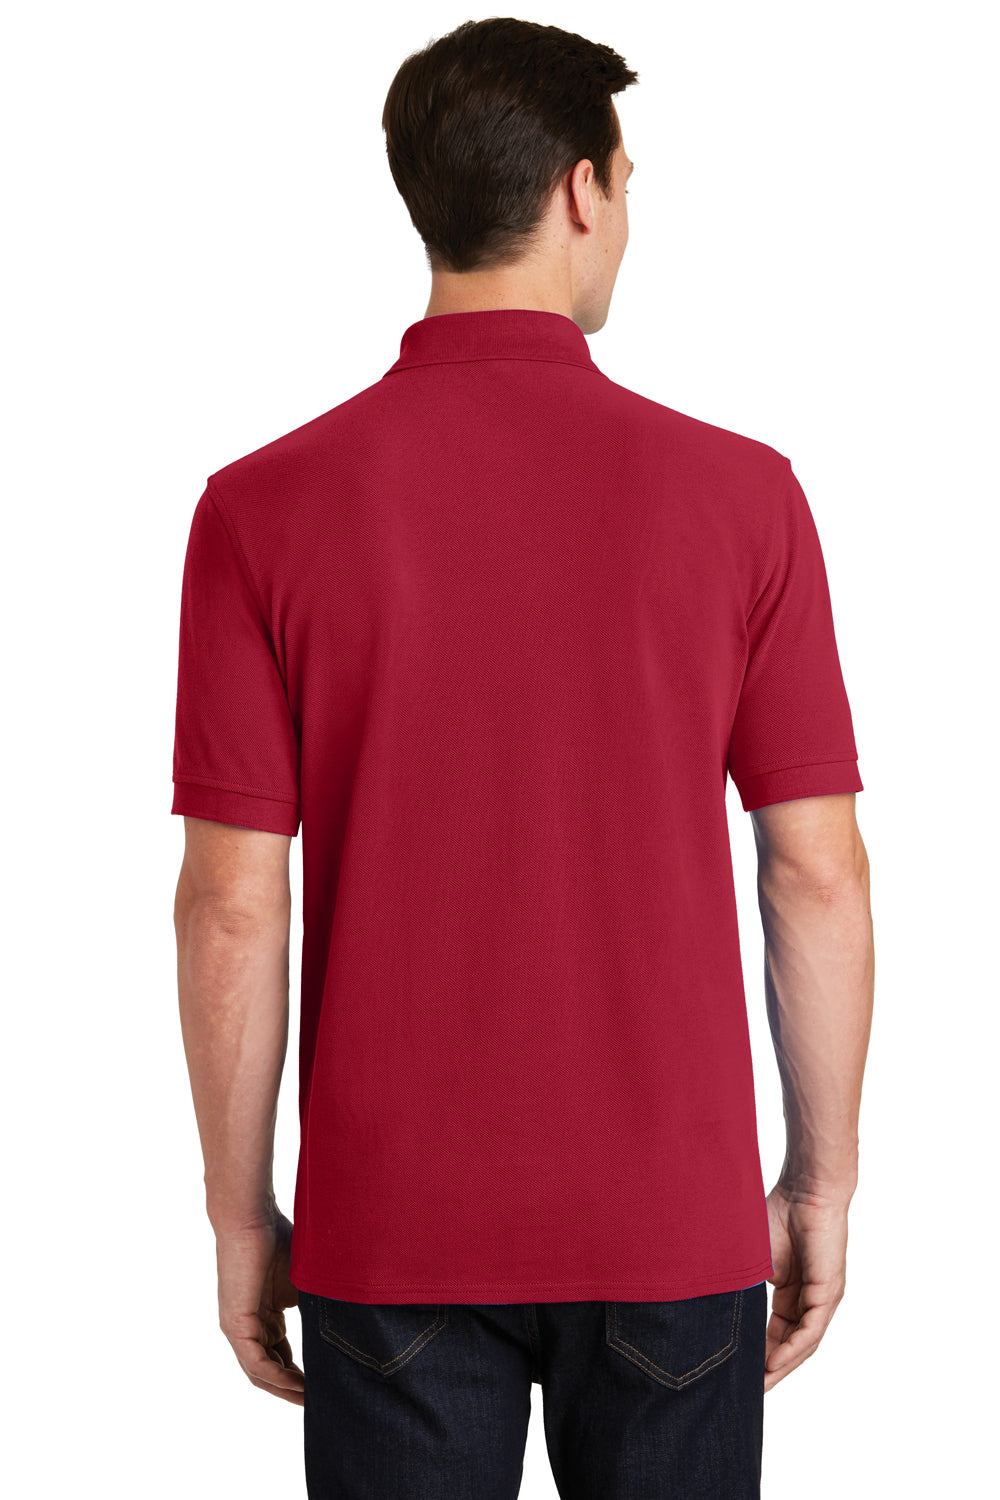 Port & Company KP1500 Mens Stain Resistant Short Sleeve Polo Shirt Red Back